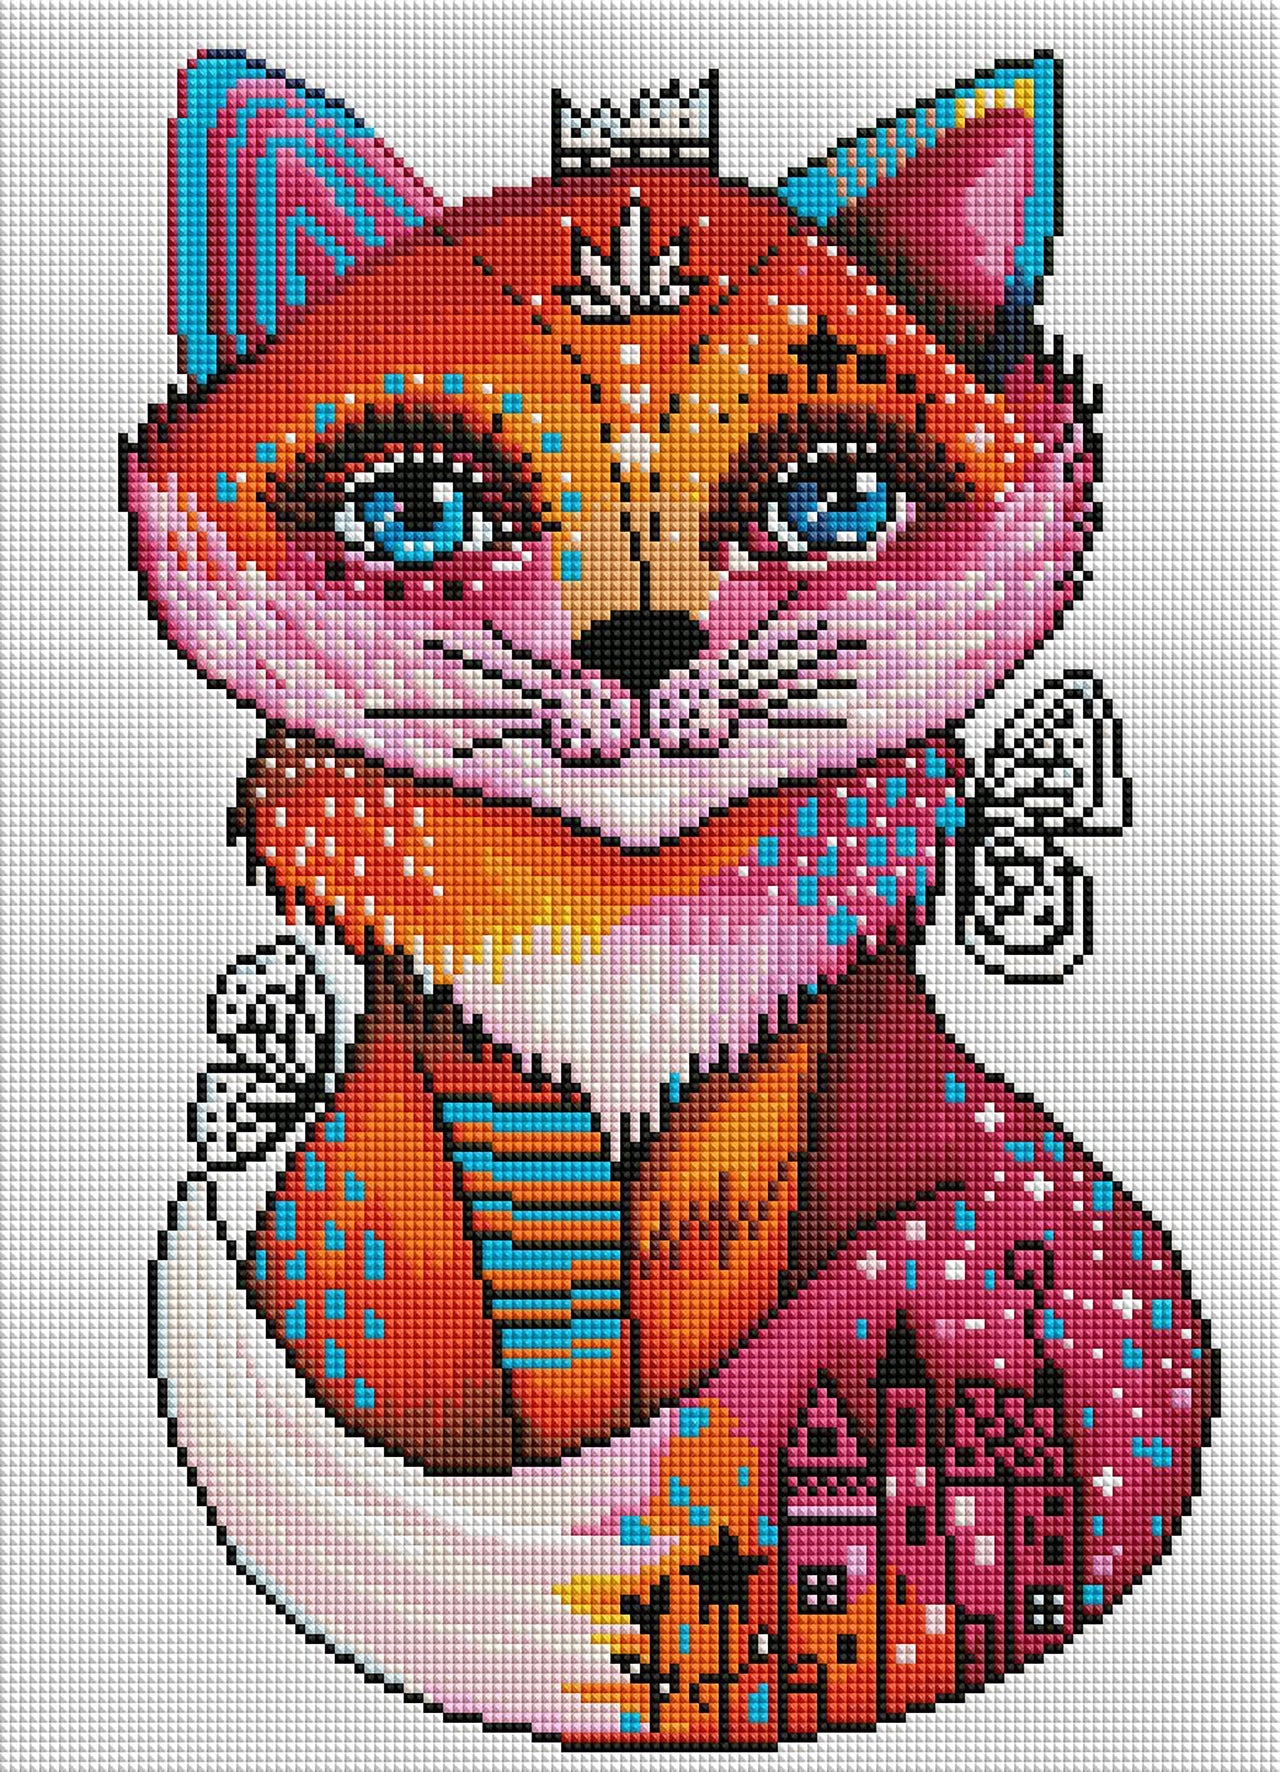 Diamond Painting Fox Wisdom 13" x 18″ (33cm x 46cm) / Square with 31 Colors including 2 ABs / 23,400